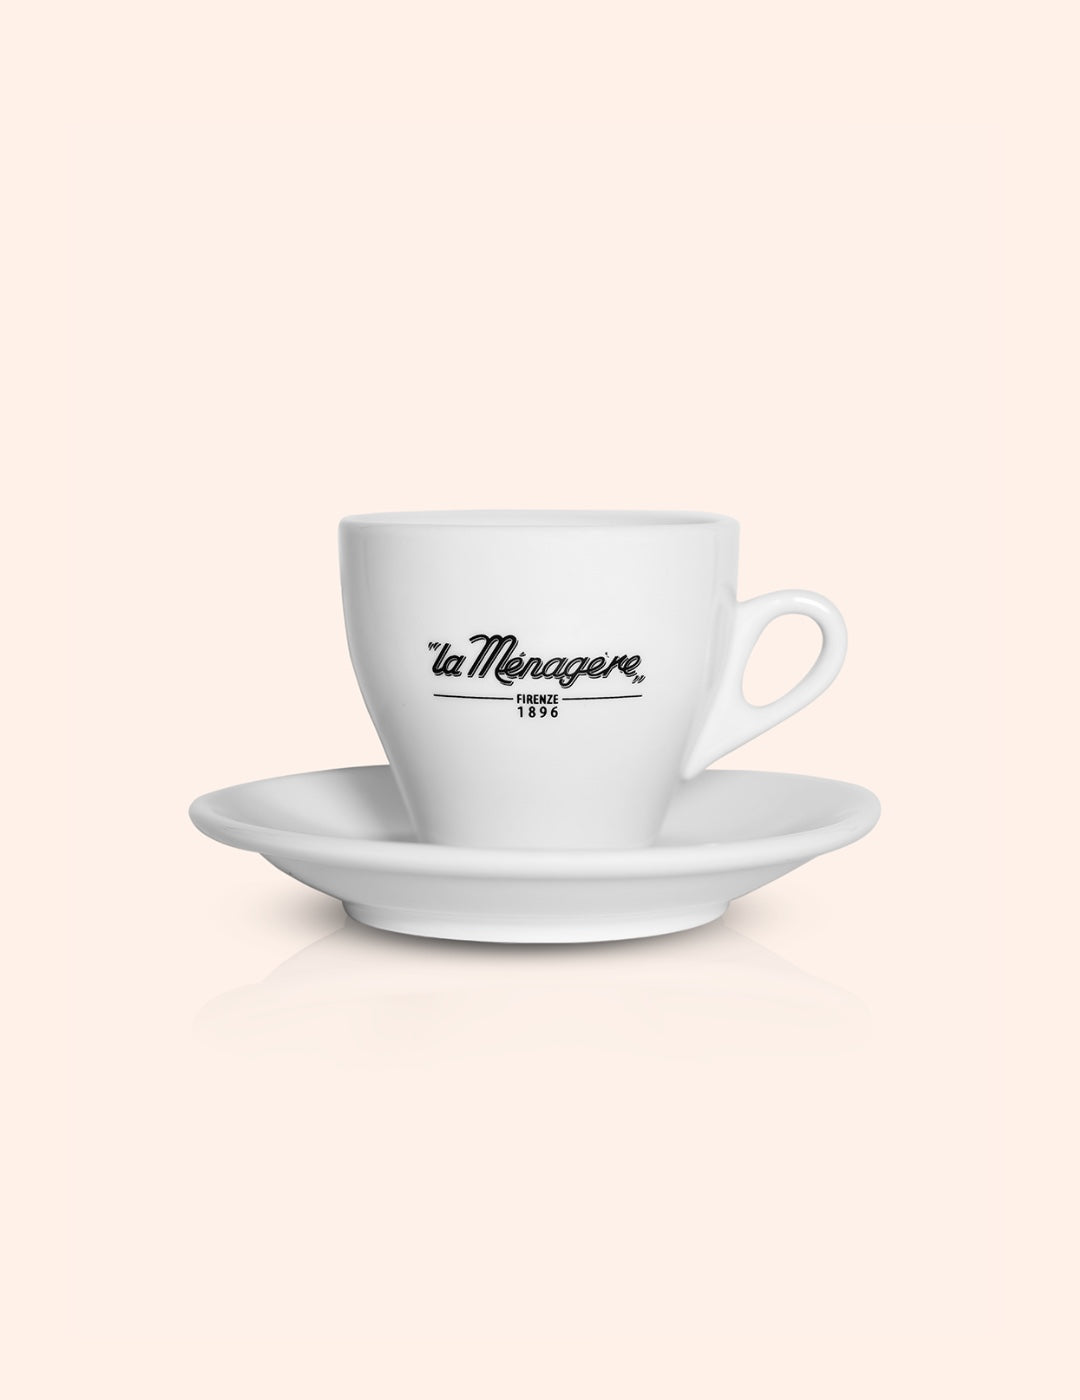 The Iconic double espresso cup